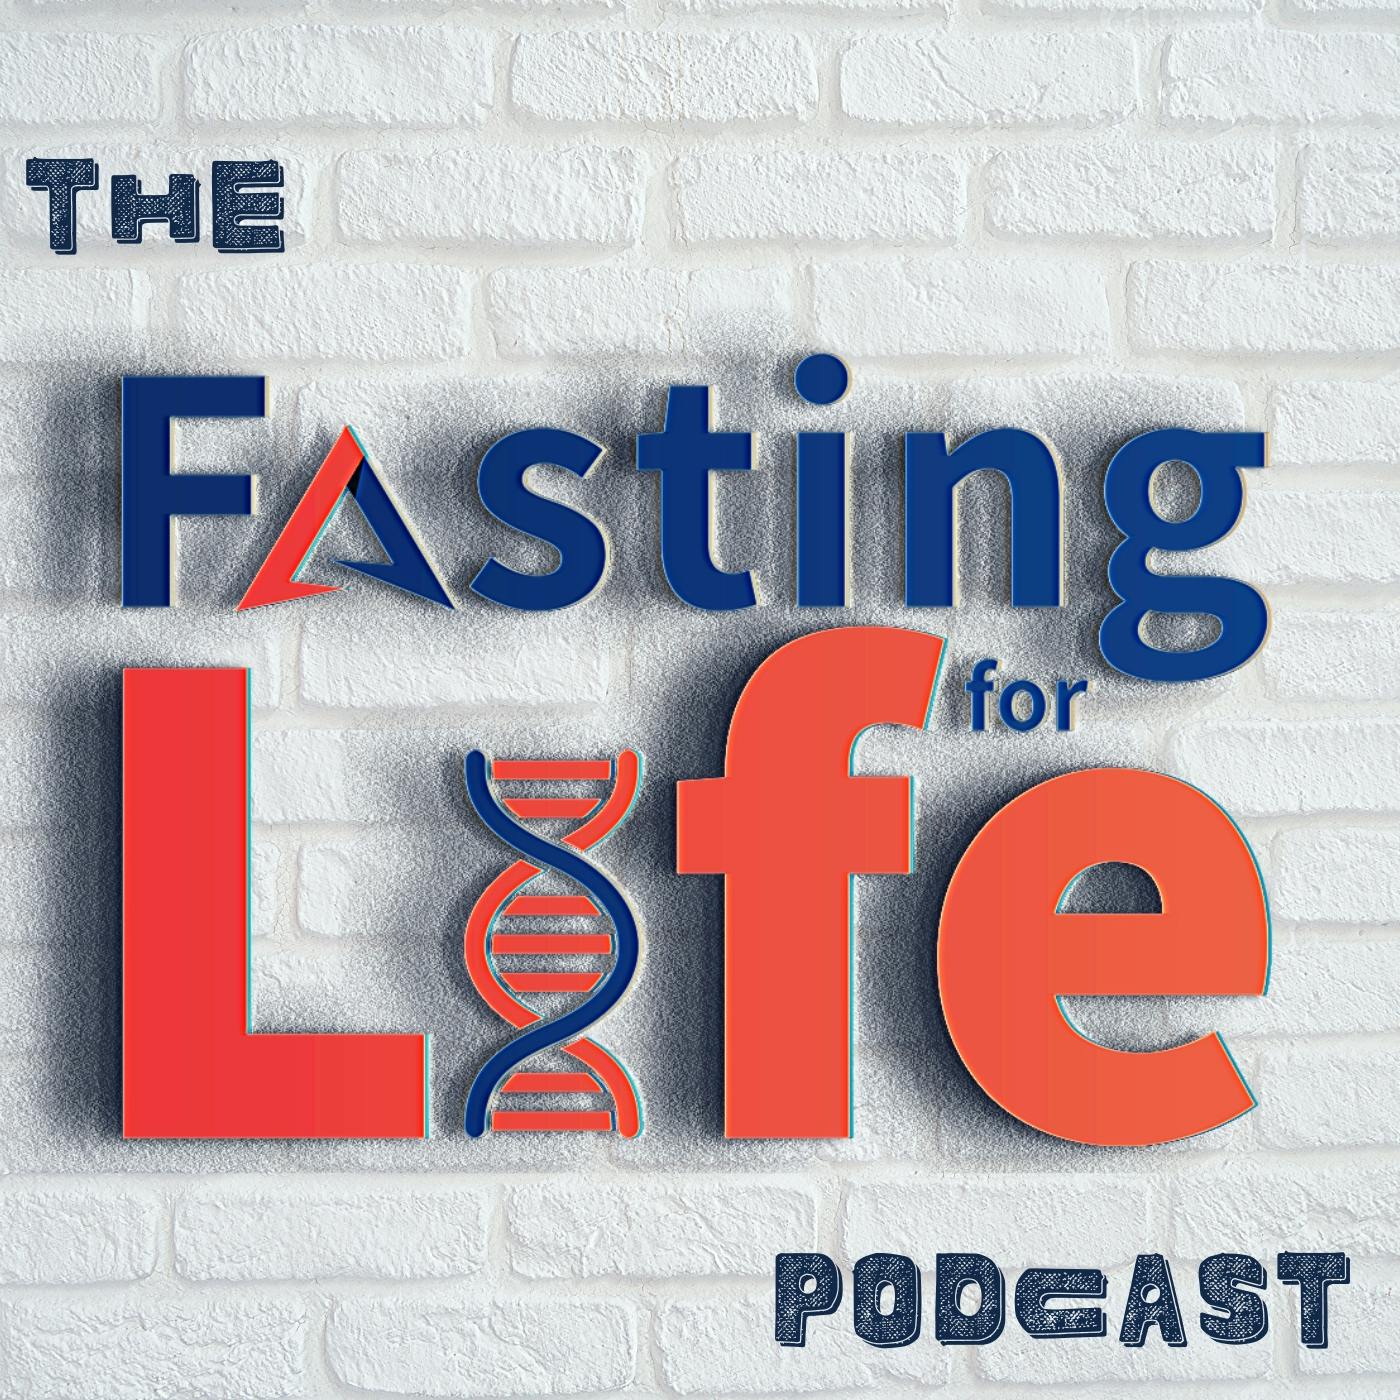 Ep. 110 - Can I fast with gout? How to lose the weight & control flare-ups | Fasting and blood pressure, diuretics, & kidneys | Can fasting & keto make gout worse? | Free OMAD Intermittent Fasting Pla